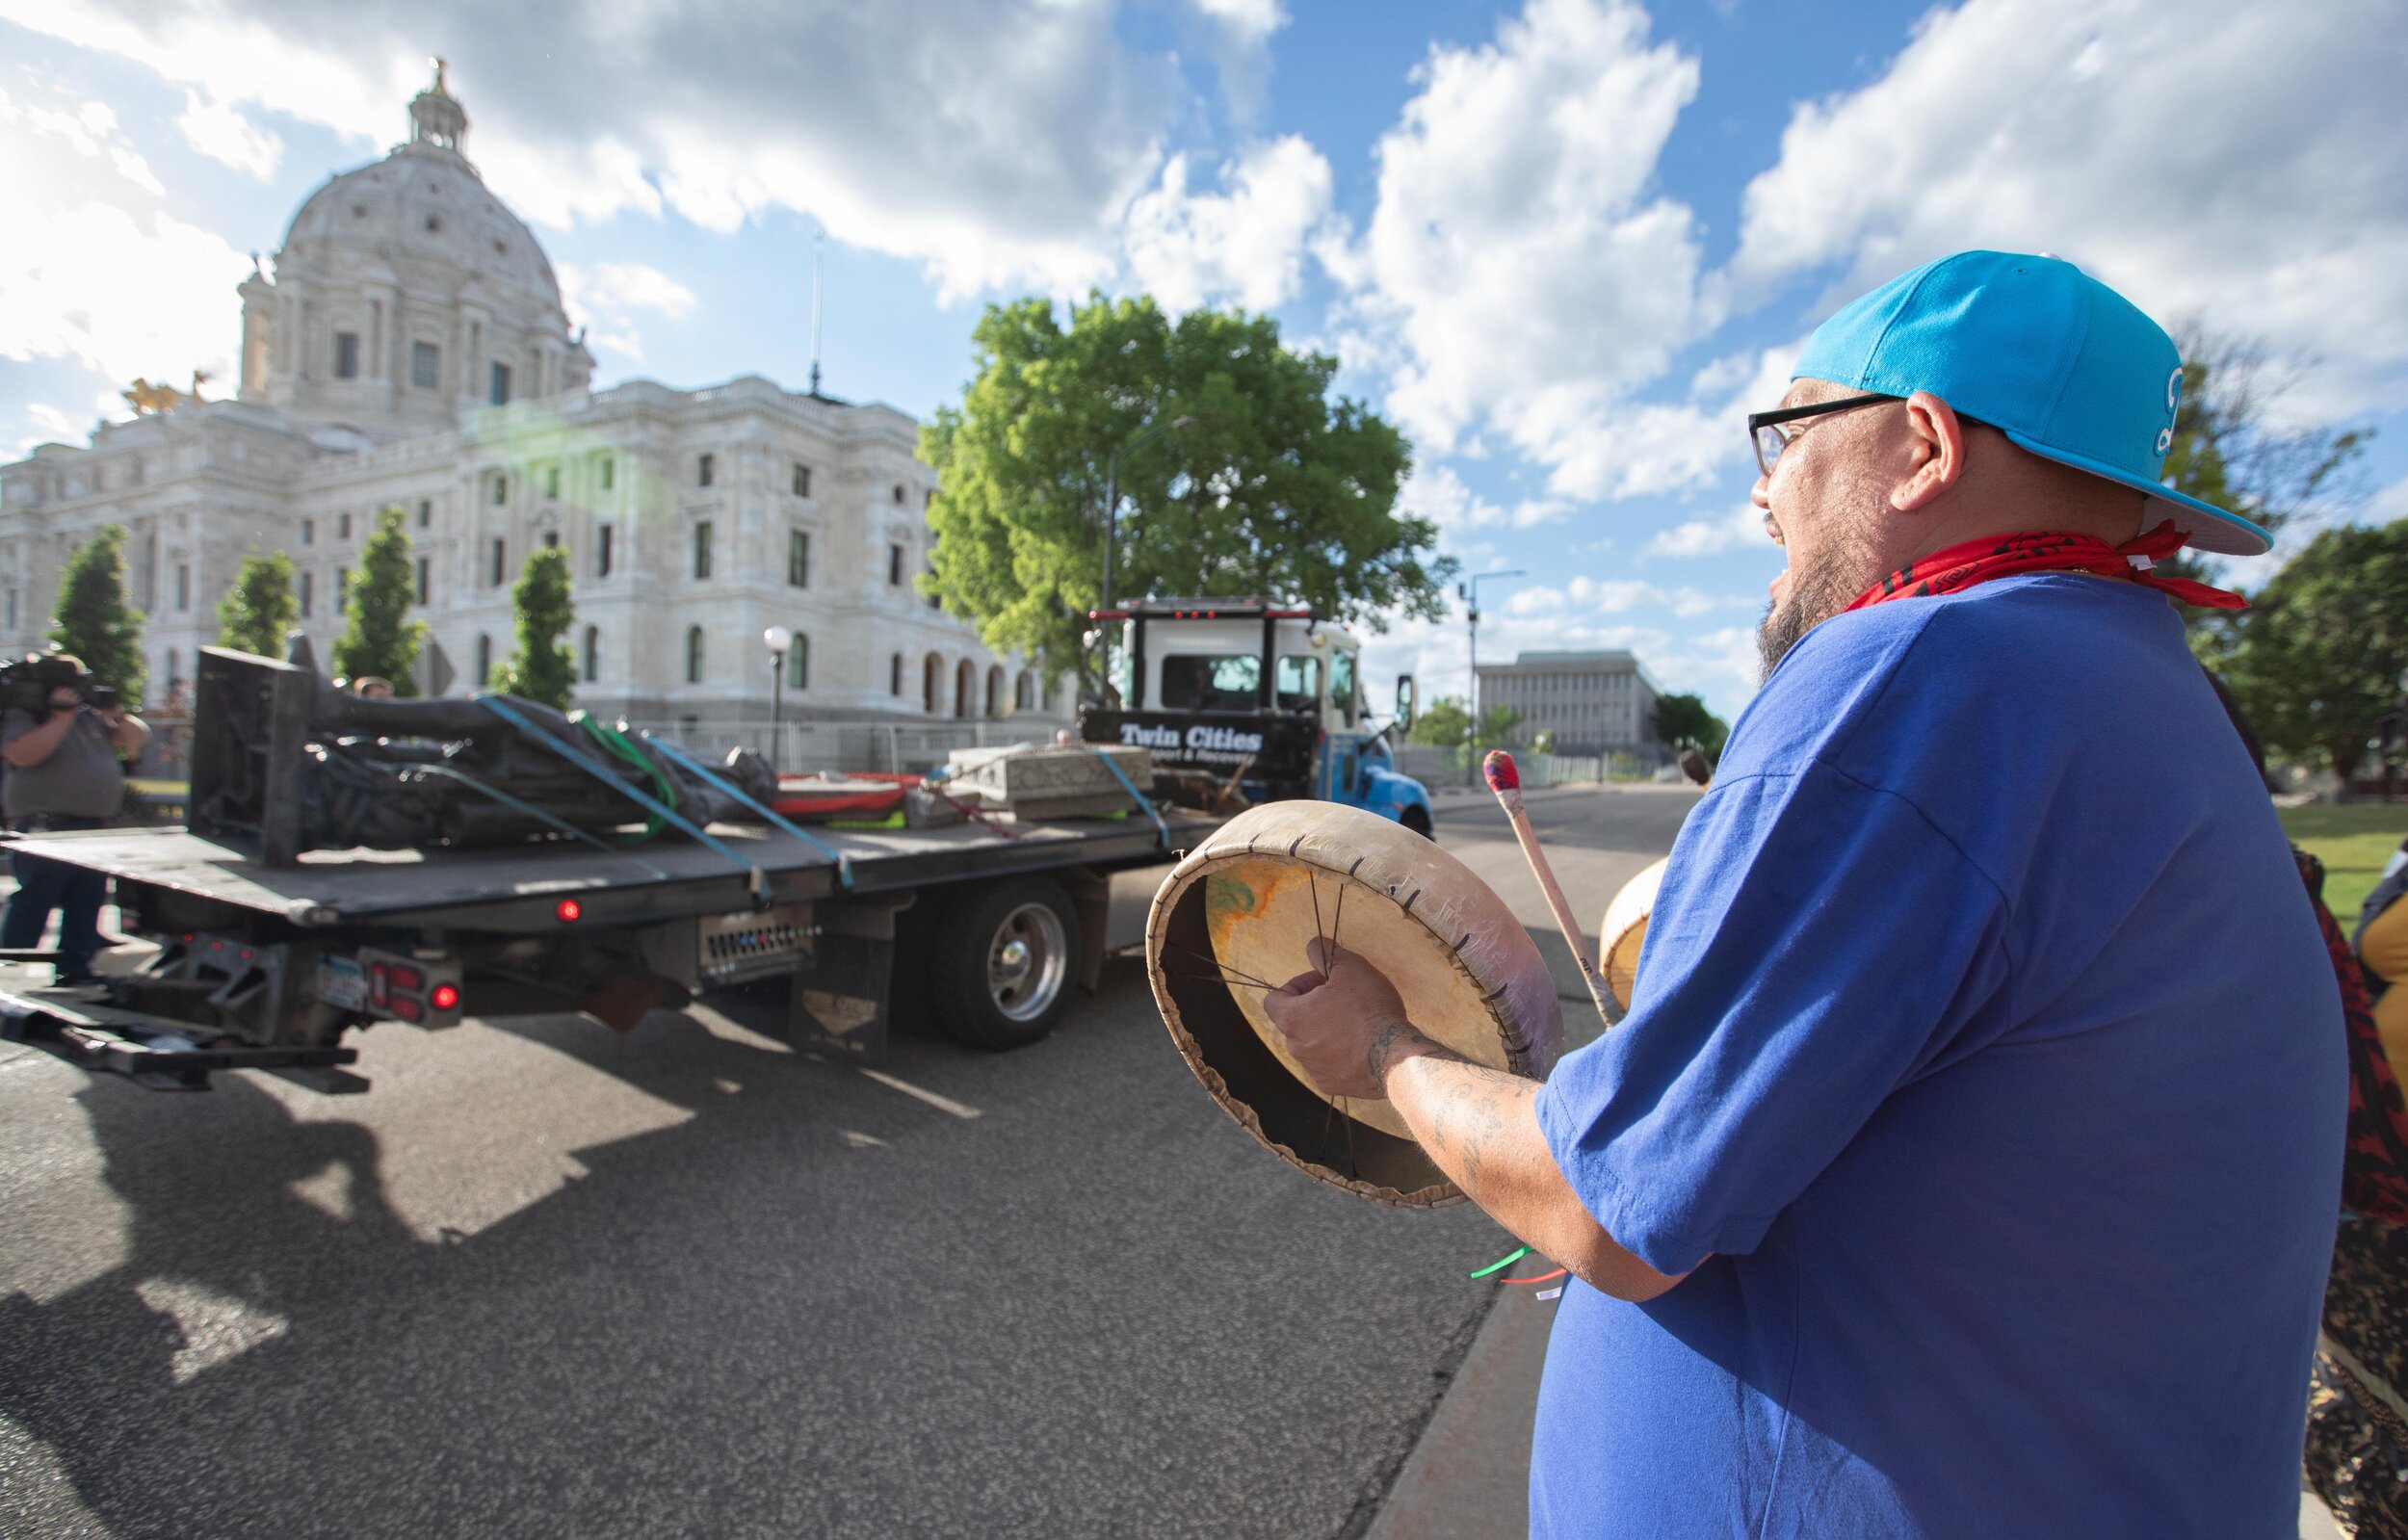  Native American activists beat drums and chant as the statue of Christopher Columbus goes by on a flatbed after it was torn down on the grounds of the State Capitol on Jun 10, 2020. 